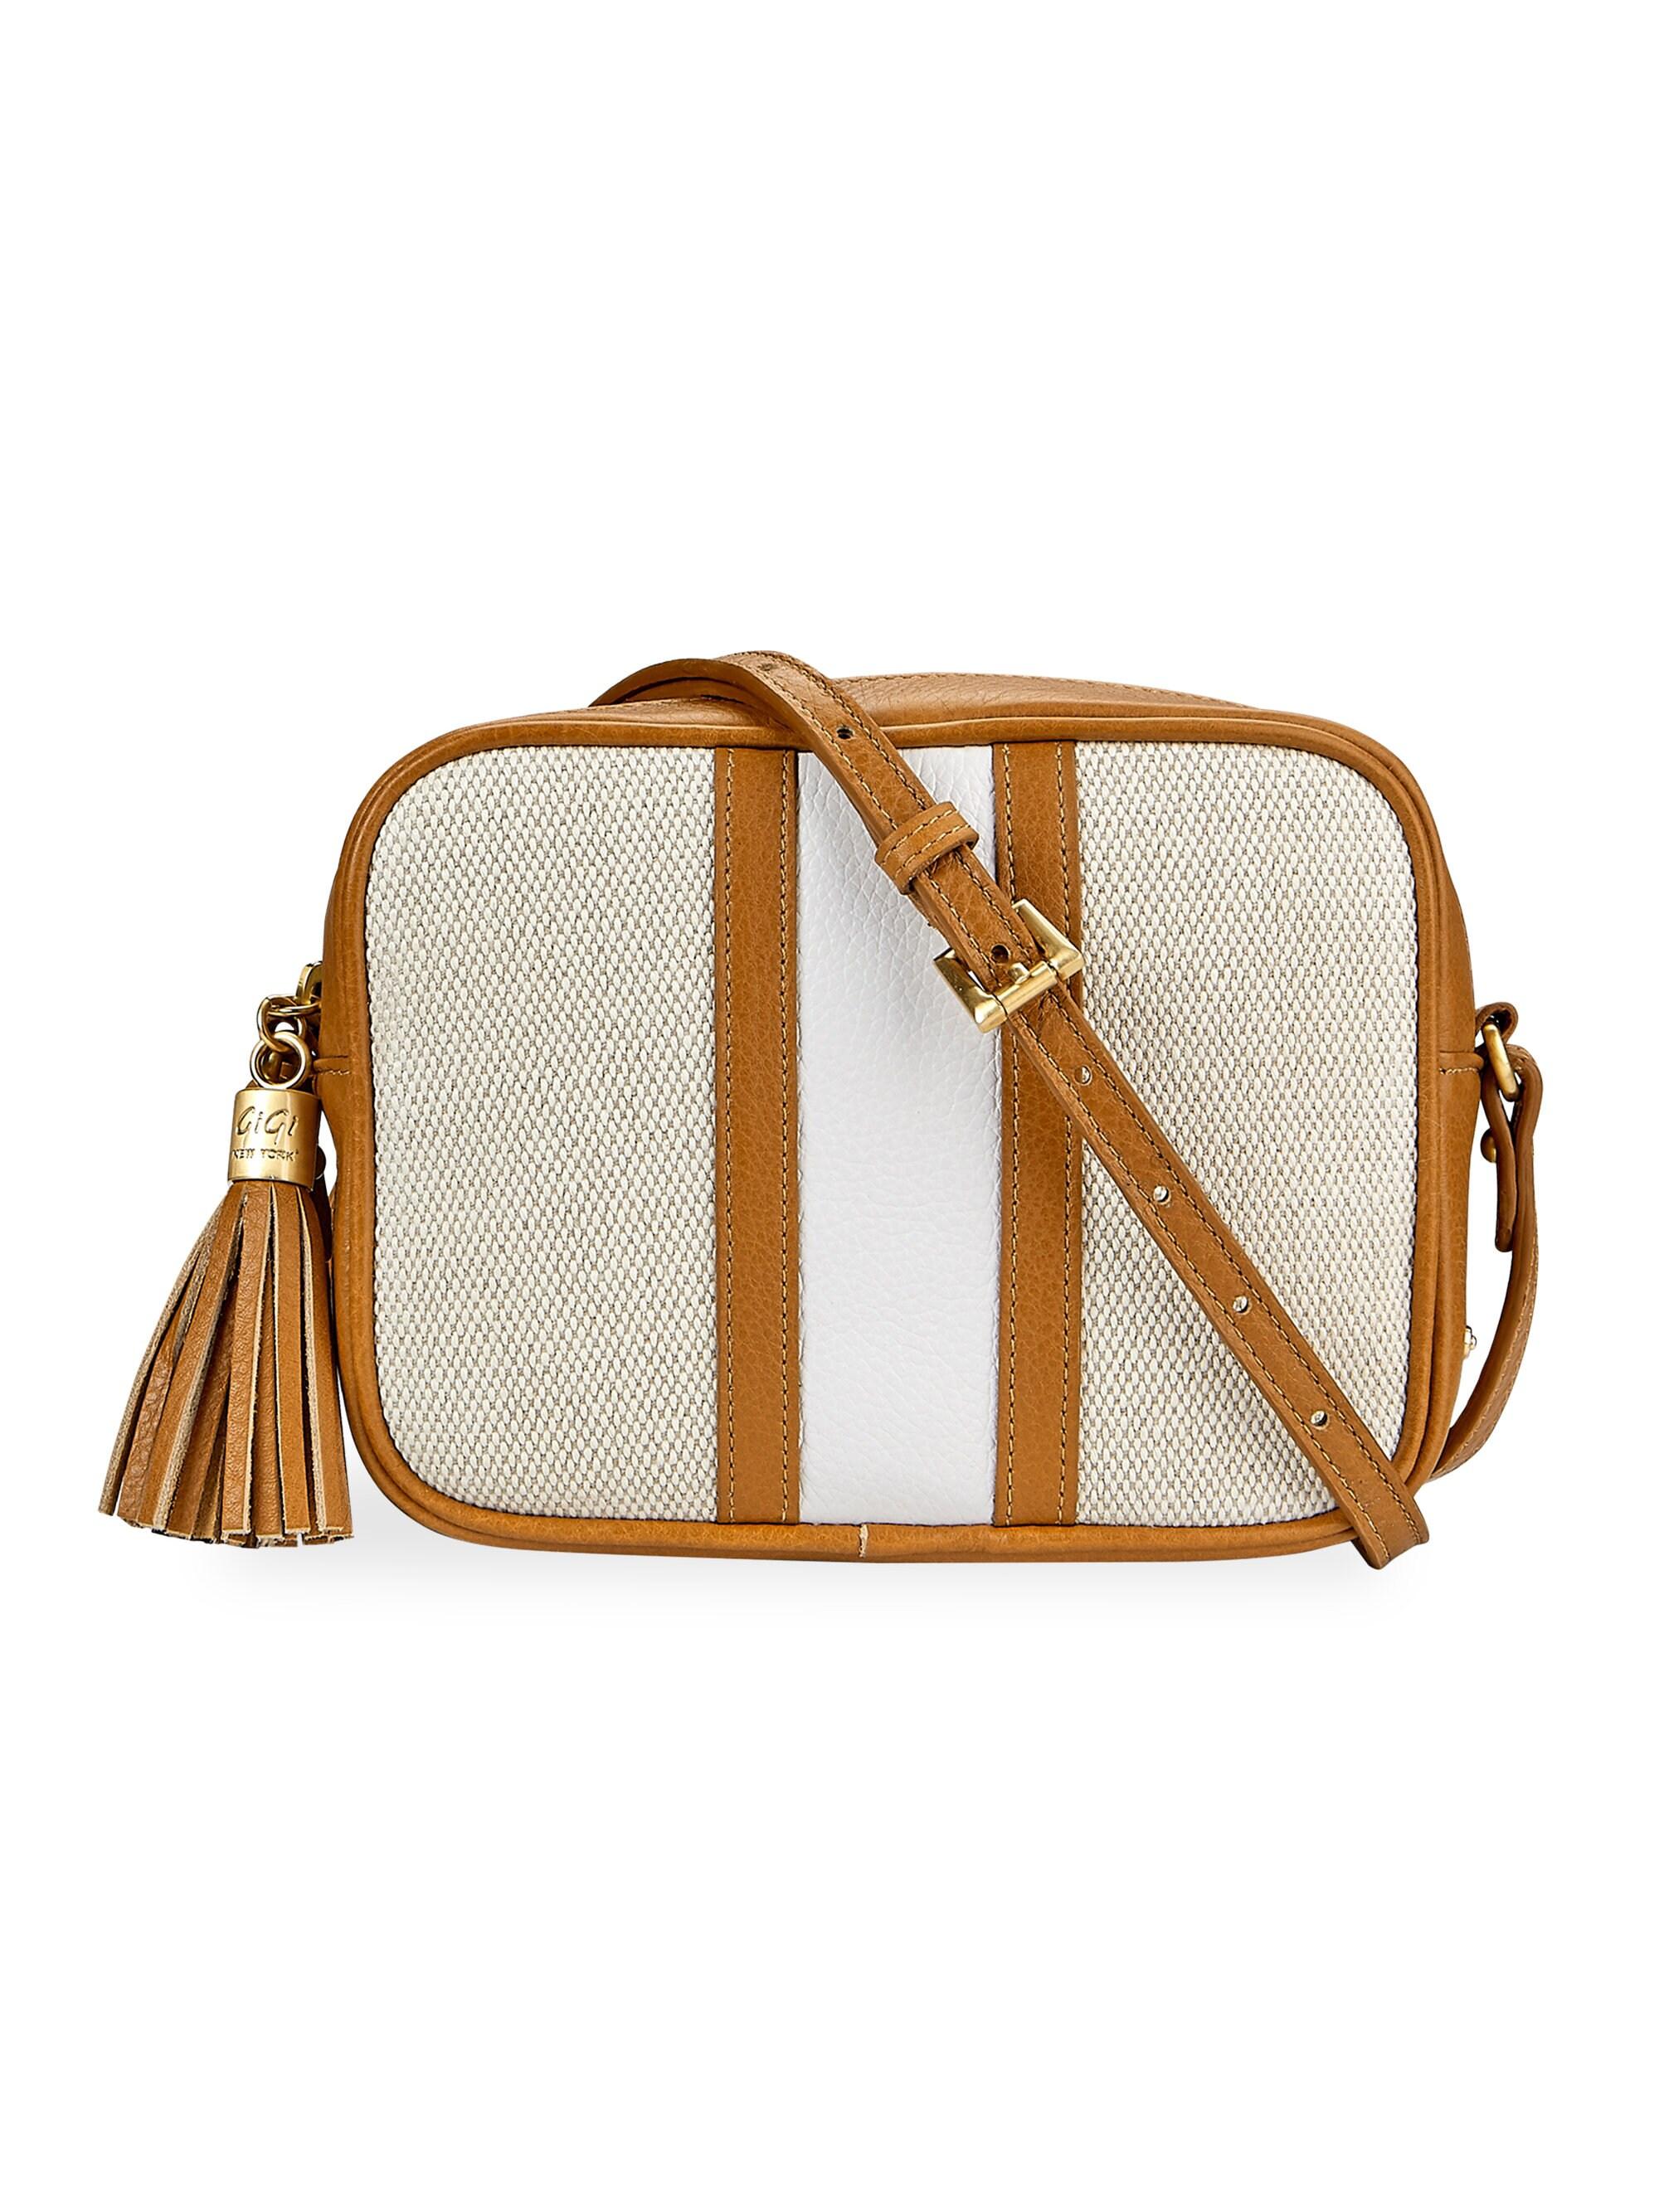 Gigi New York Women&#39;s Maddie Leather & Canvas Crossbody Bag - Camel in Natural - Lyst